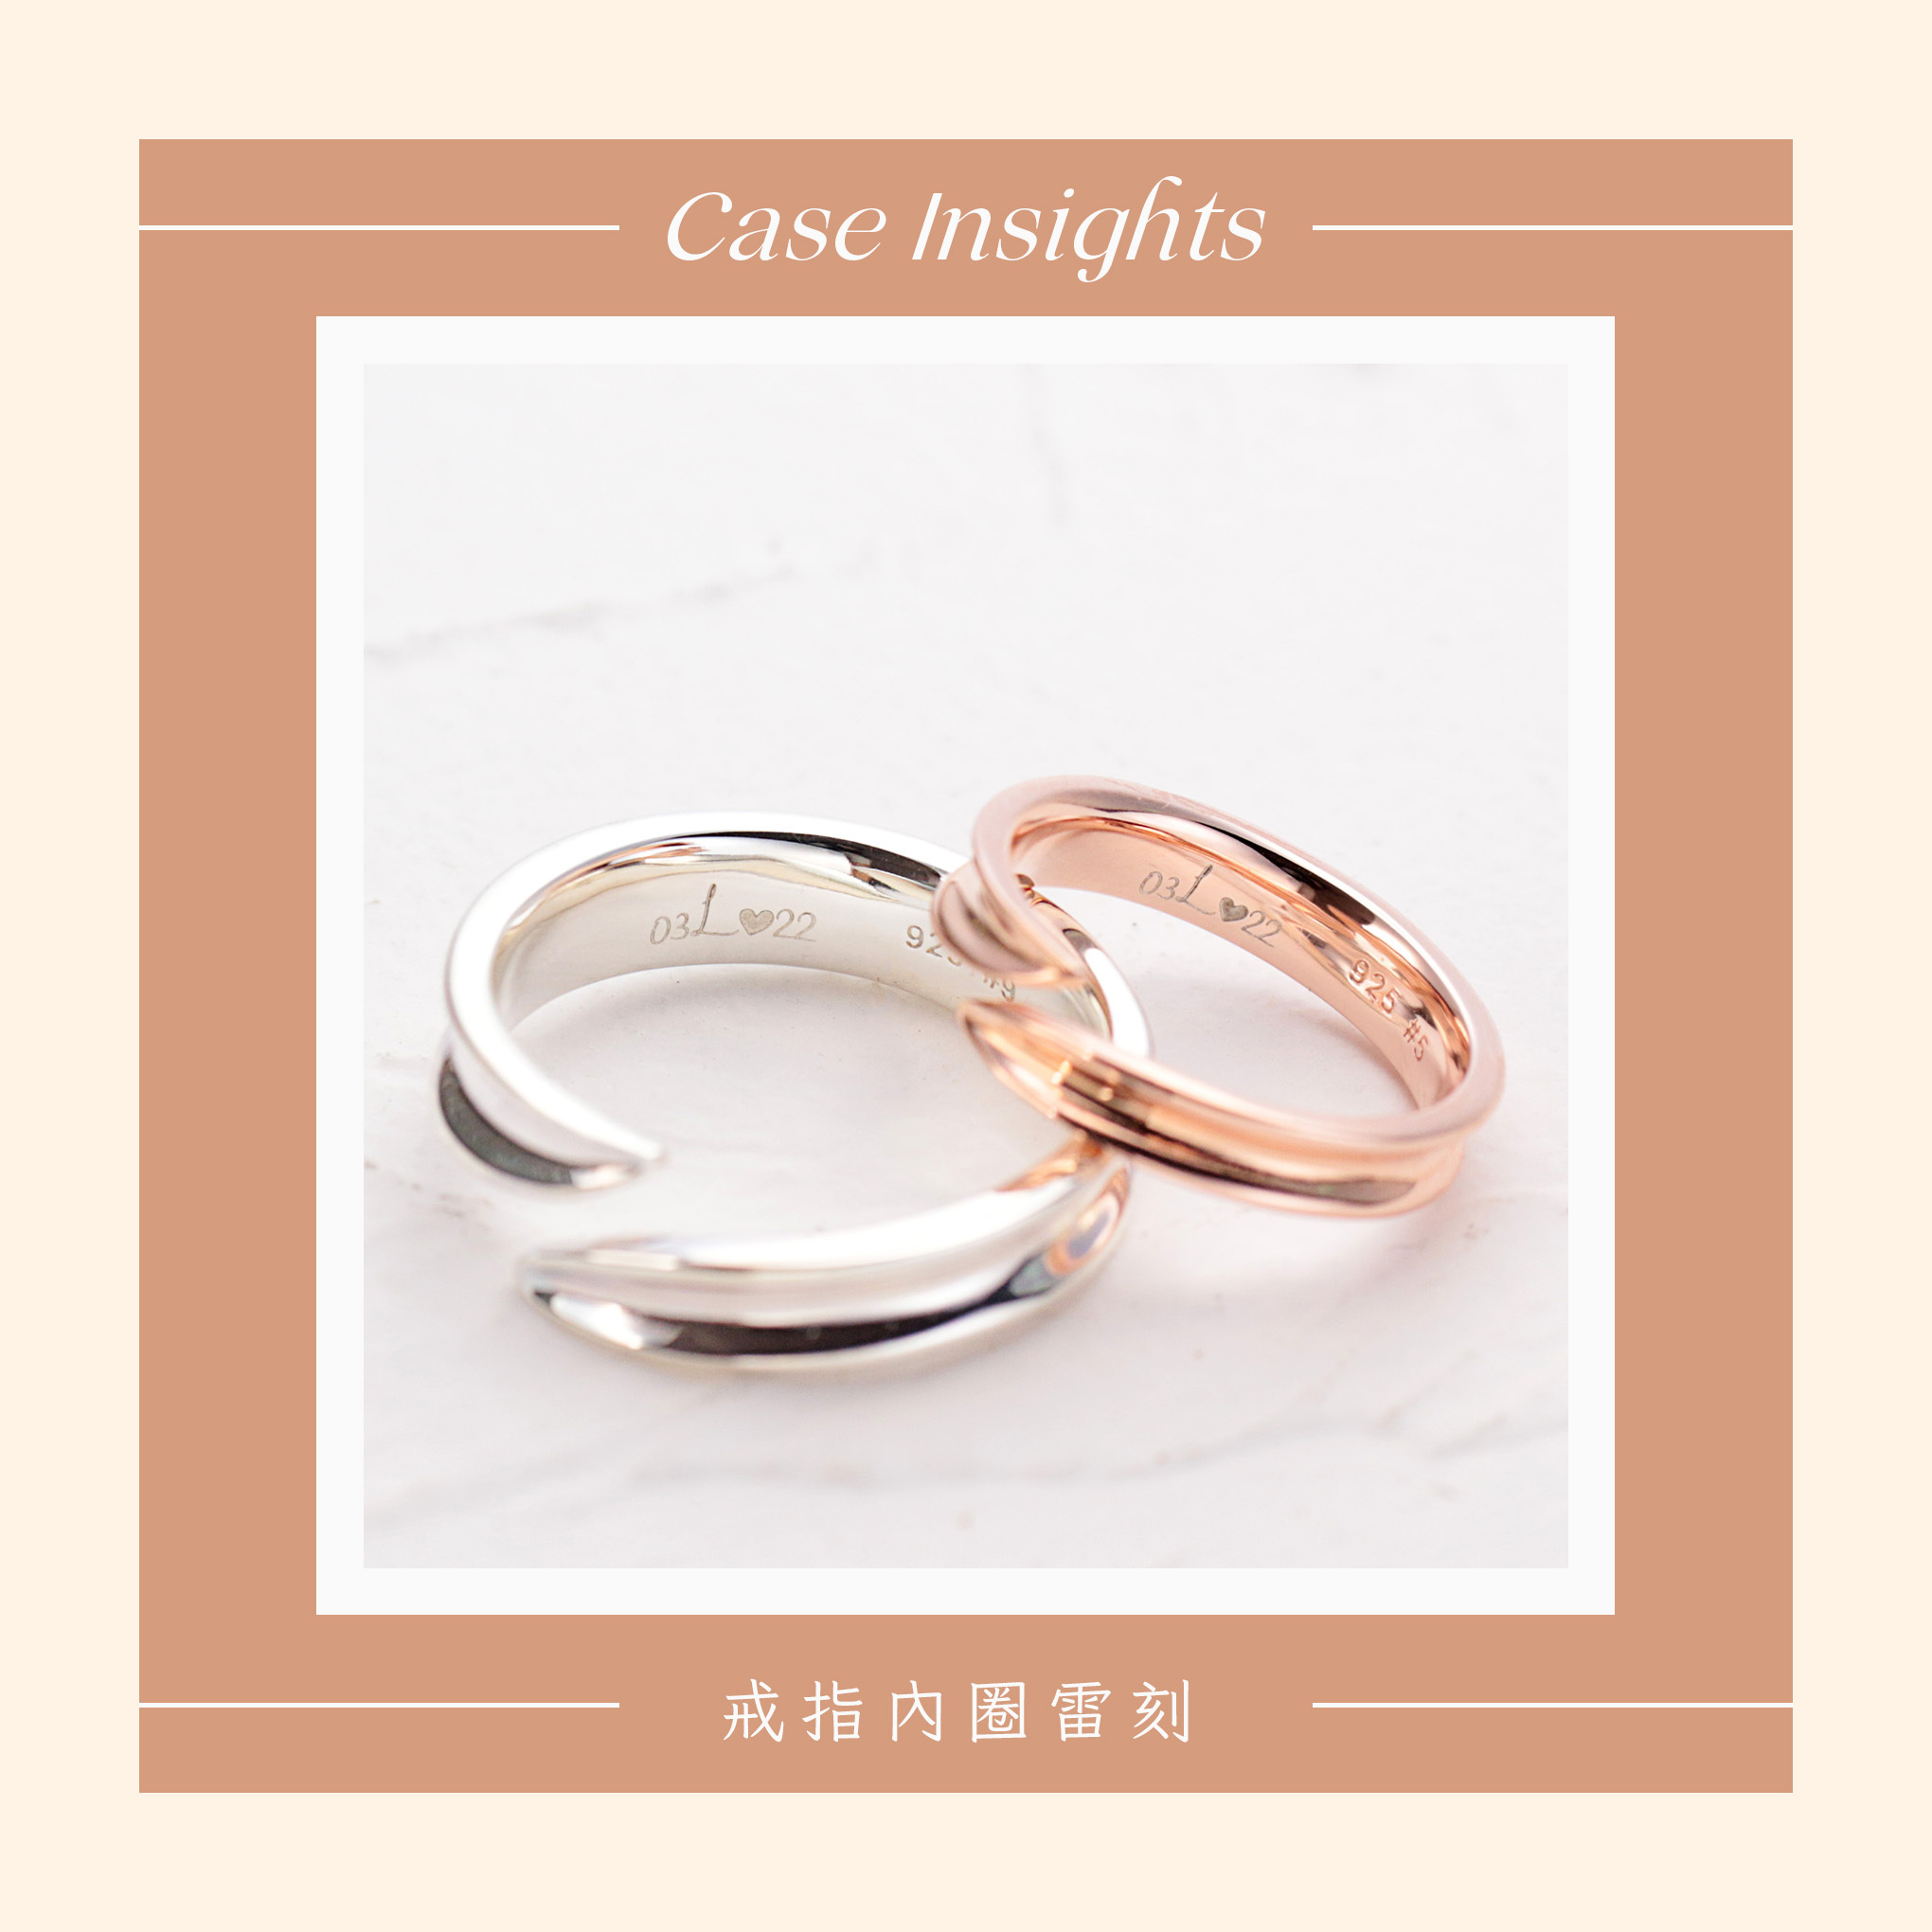 Case insights 01